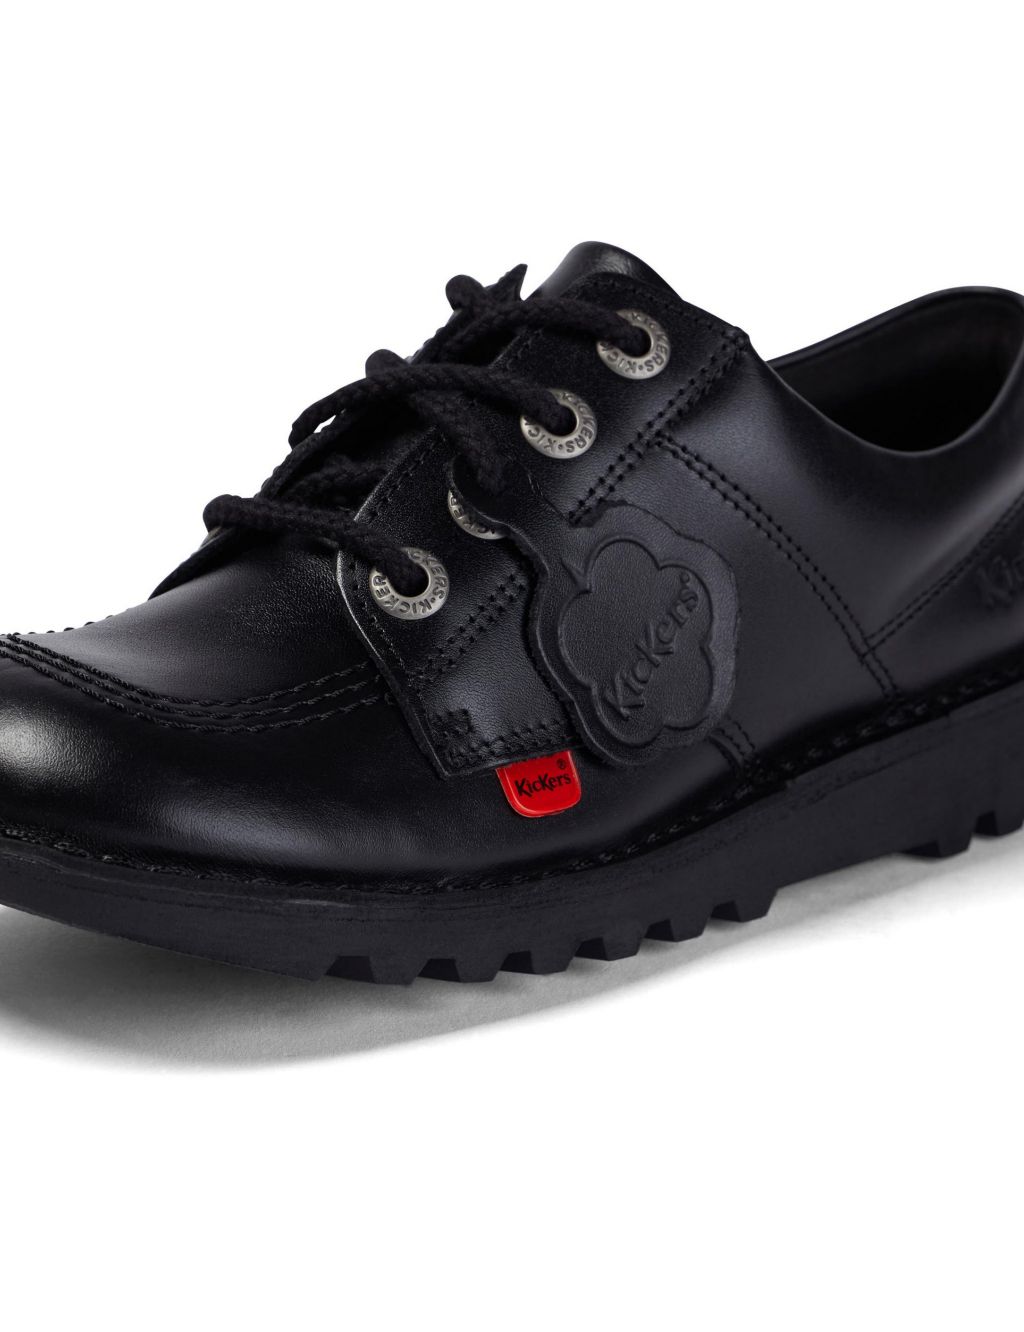 Kids' Leather Lace School Shoes image 3